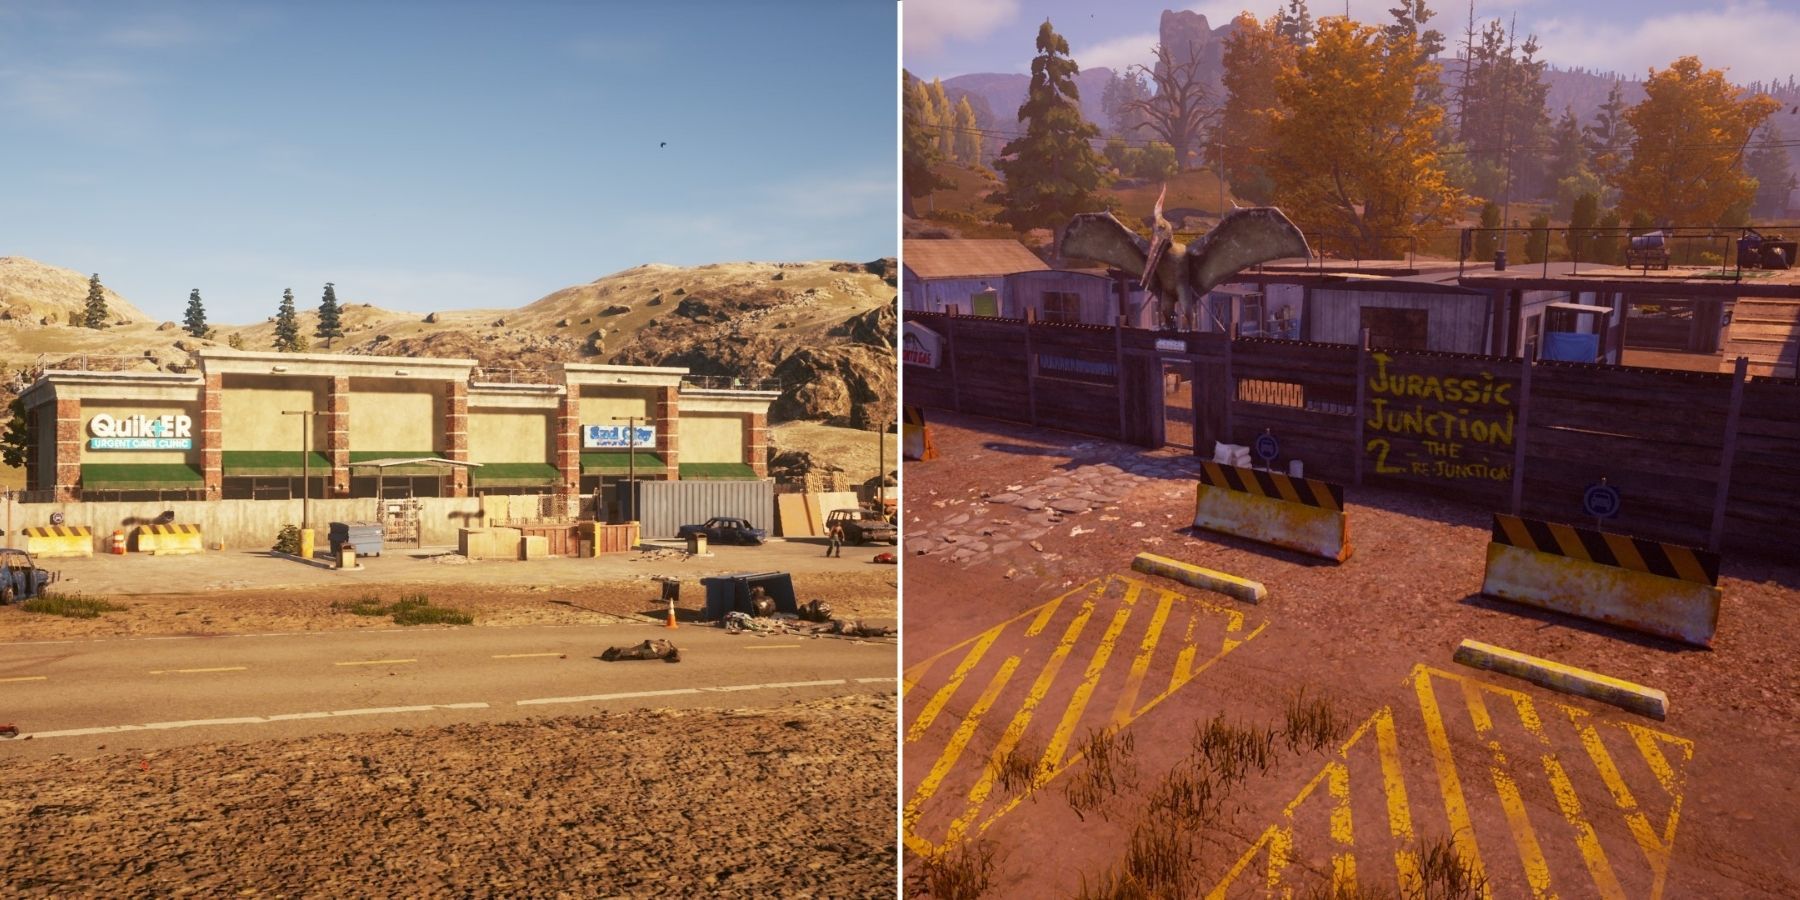 state of decay 2 increased slots mod